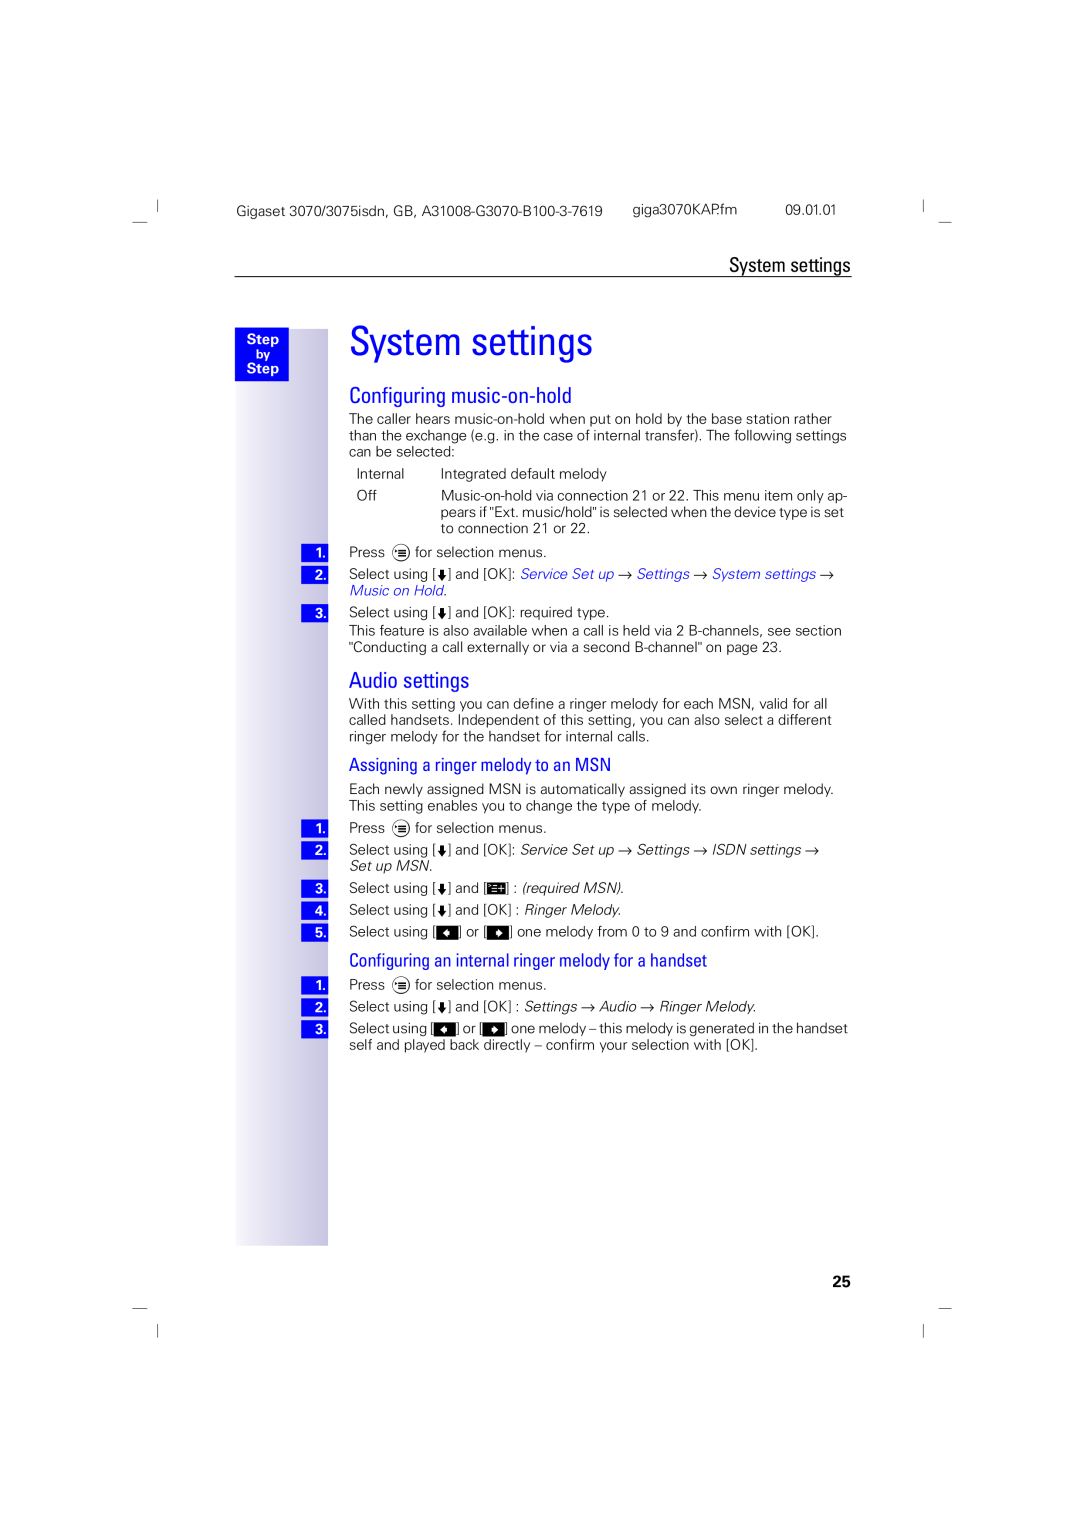 Siemens 75, 3070 System settings, Configuring music-on-hold, Audio settings, Assigning a ringer melody to an MSN, Step 